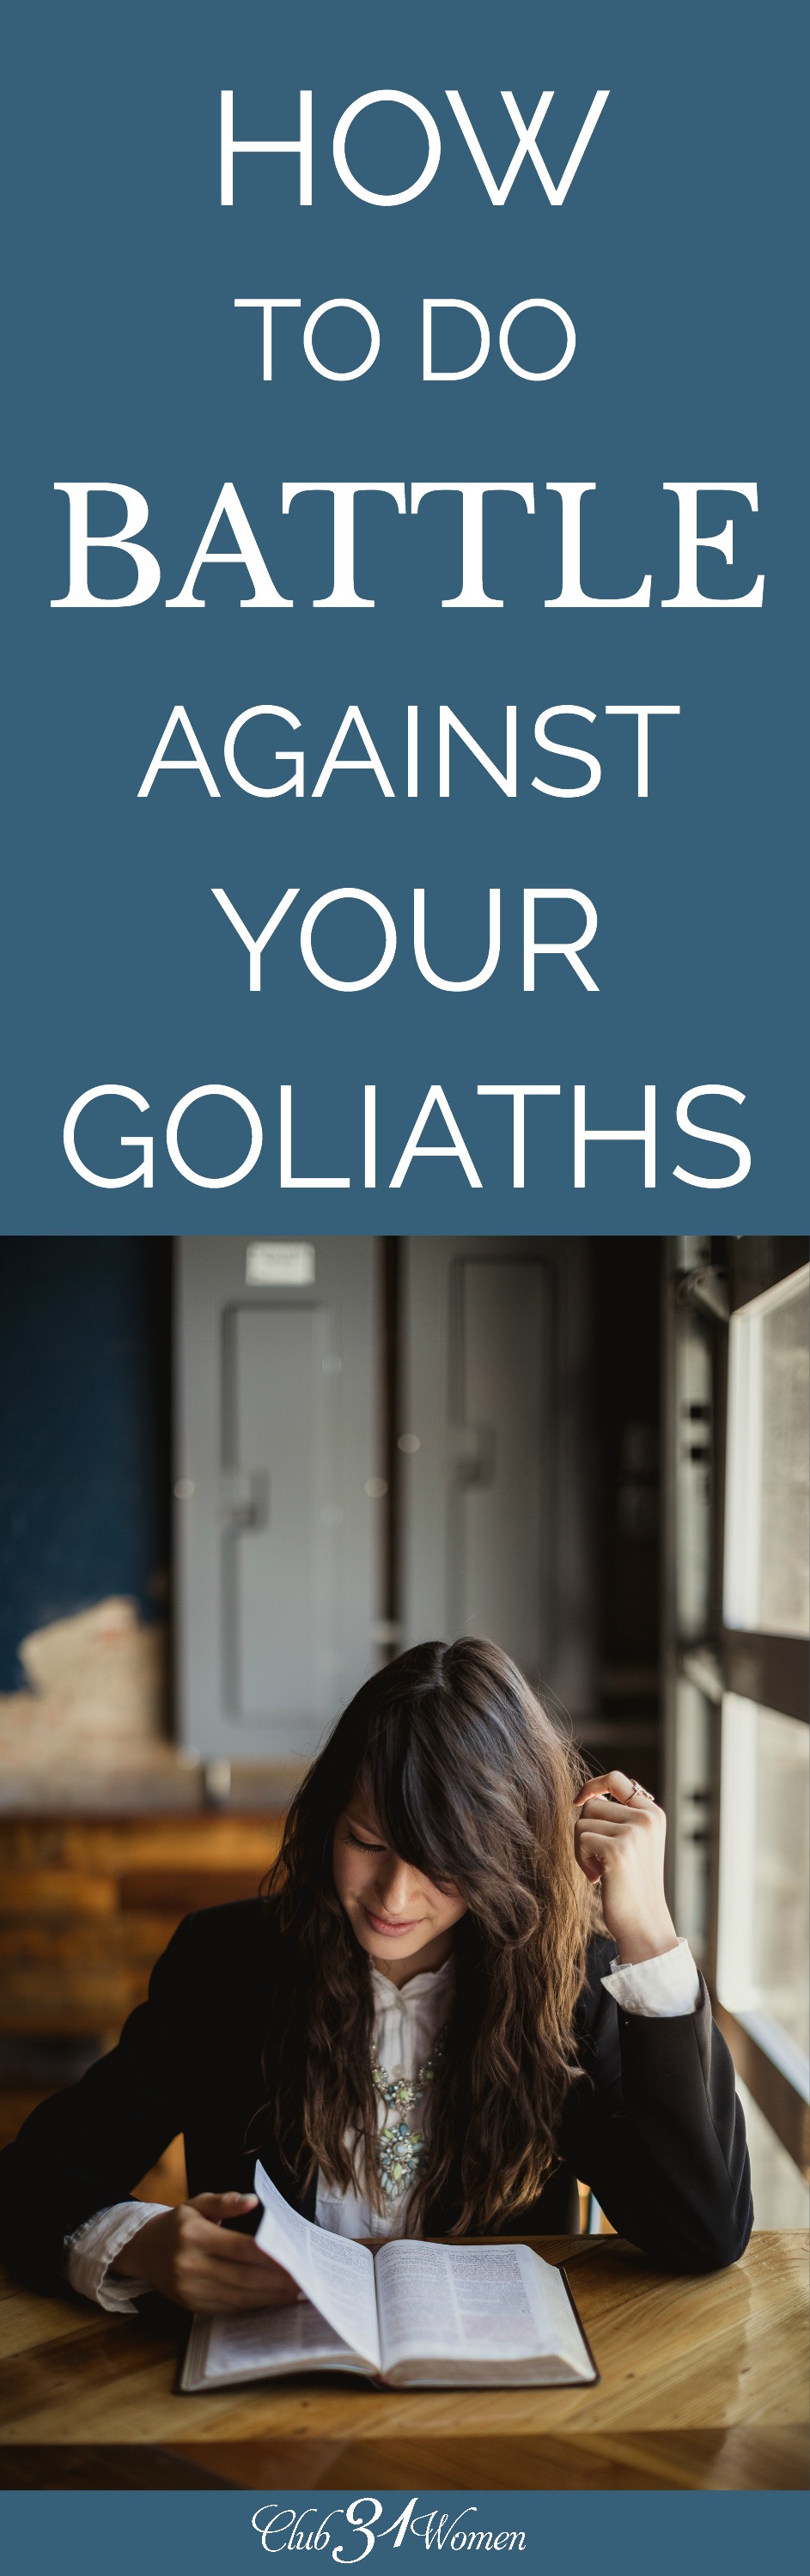 What do you do when you're facing a battle you feel is too big for you to fight? How can we learn from David in his fight with Goliath? via @Club31Women